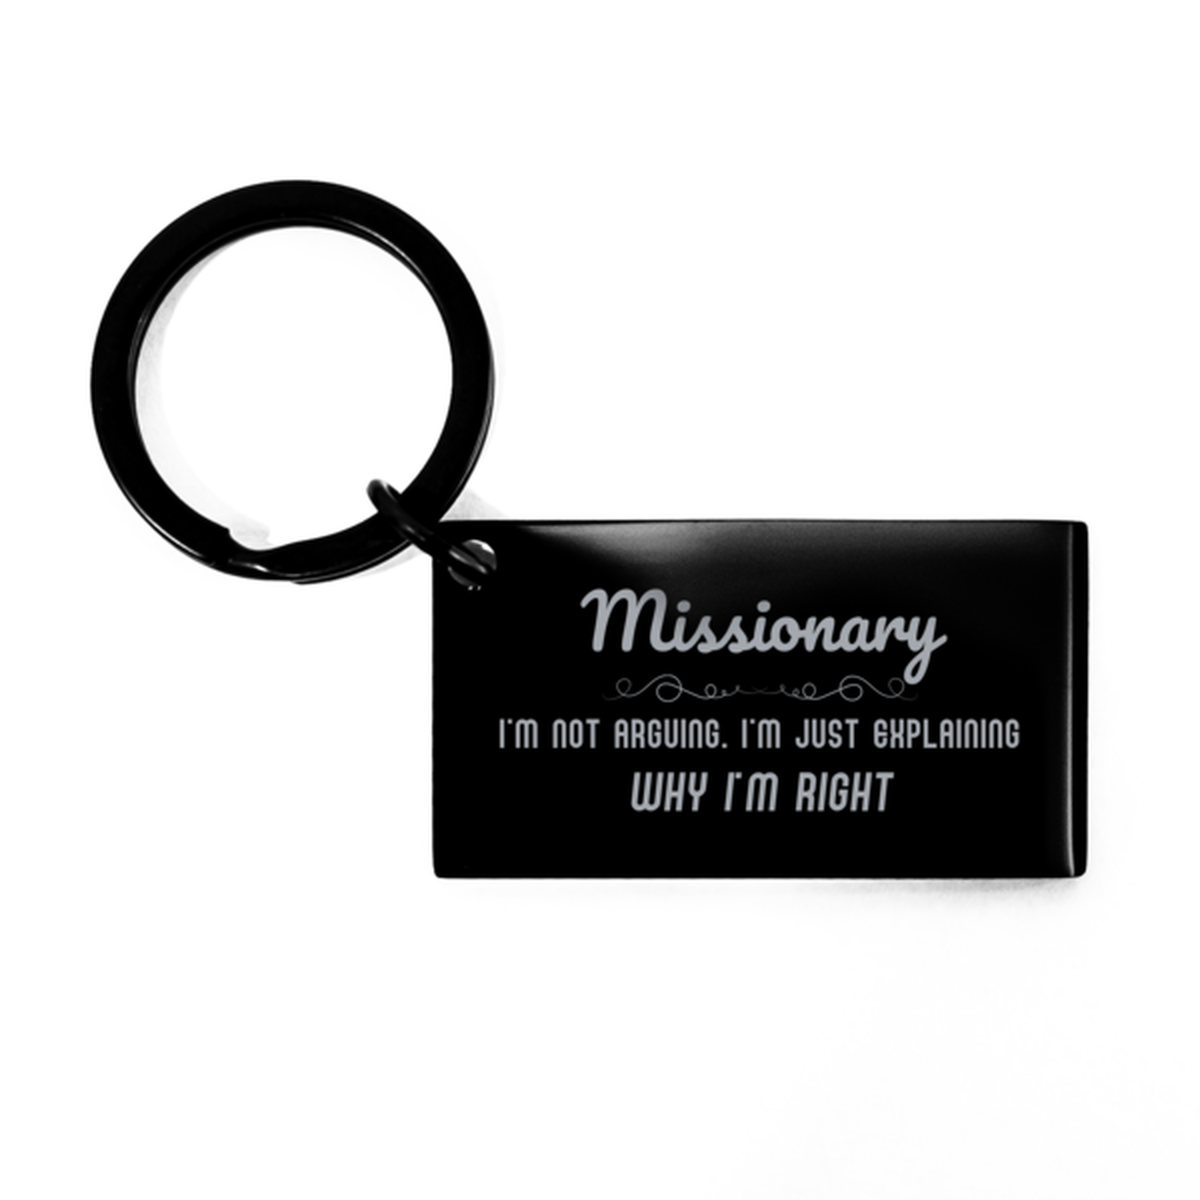 Missionary I'm not Arguing. I'm Just Explaining Why I'm RIGHT Keychain, Funny Saying Quote Missionary Gifts For Missionary Graduation Birthday Christmas Gifts for Men Women Coworker